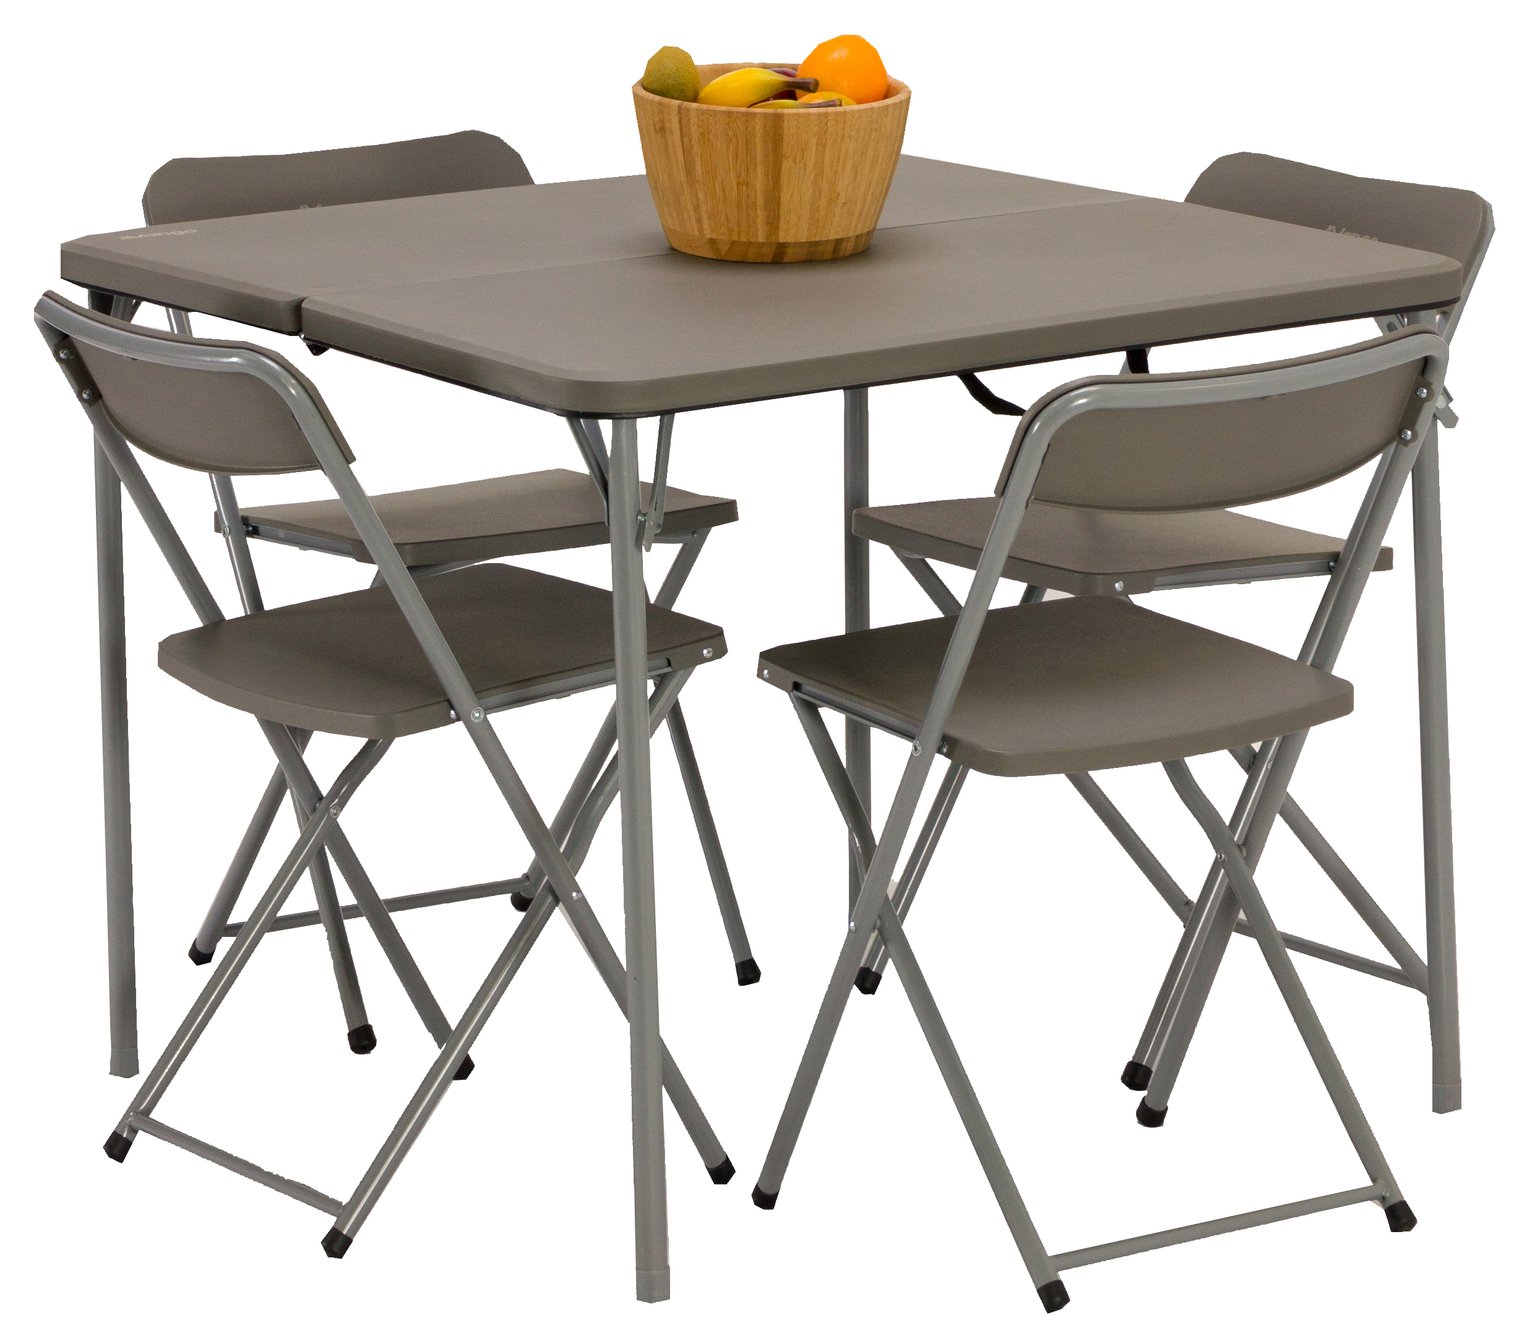 camping table and chairs set